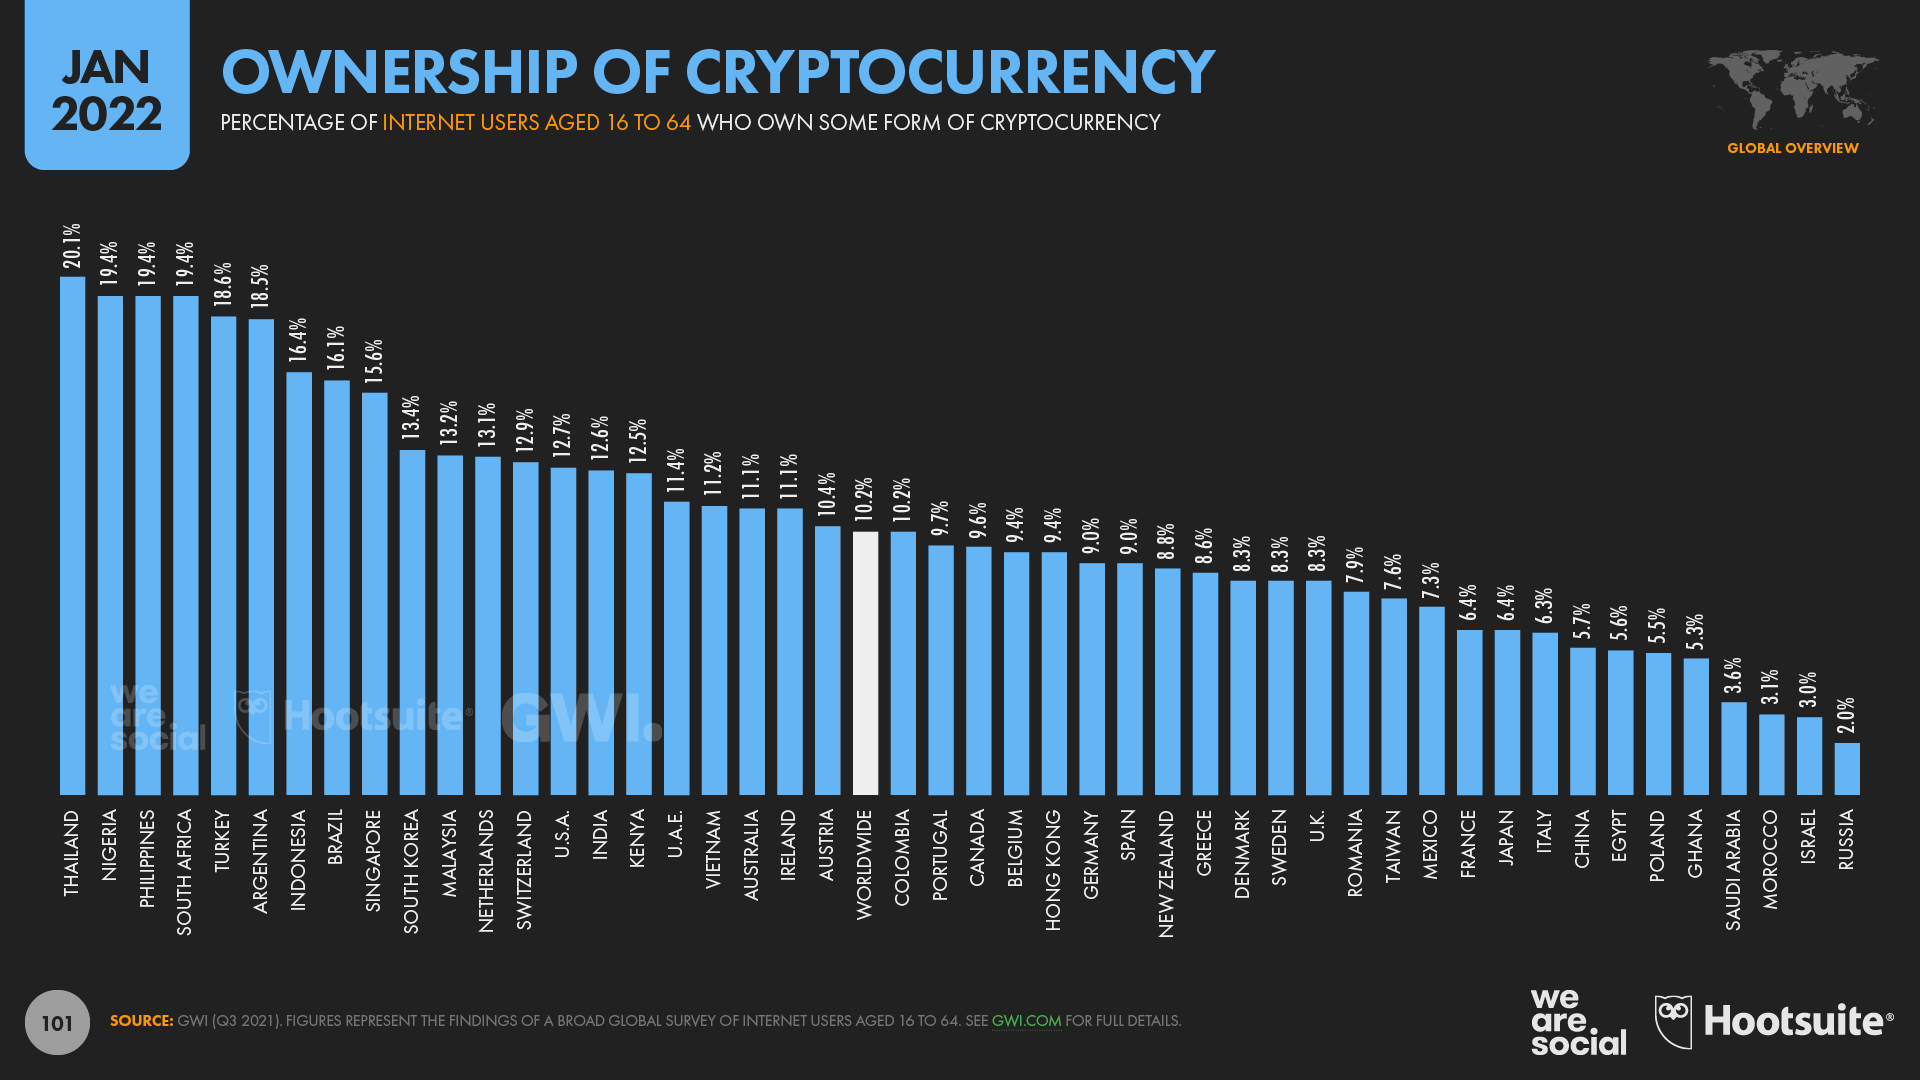 Ownership rate of crypto by country (Jan 2022)